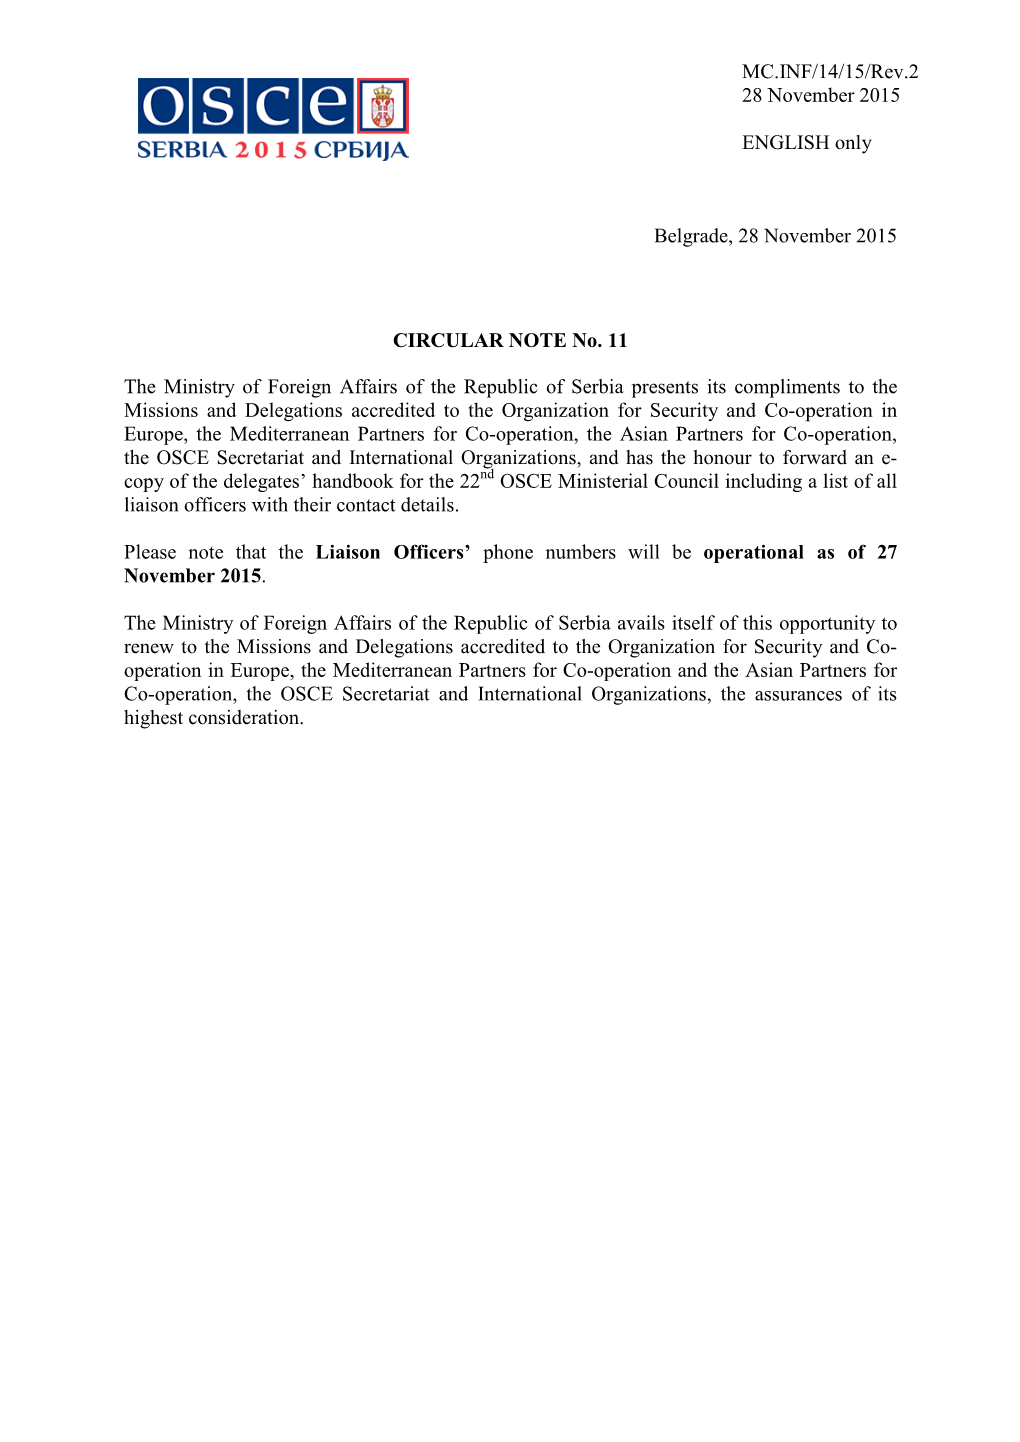 Belgrade, 28 November 2015 CIRCULAR NOTE No. 11 the Ministry of Foreign Affairs of the Republic of Serbia Presents Its Complime